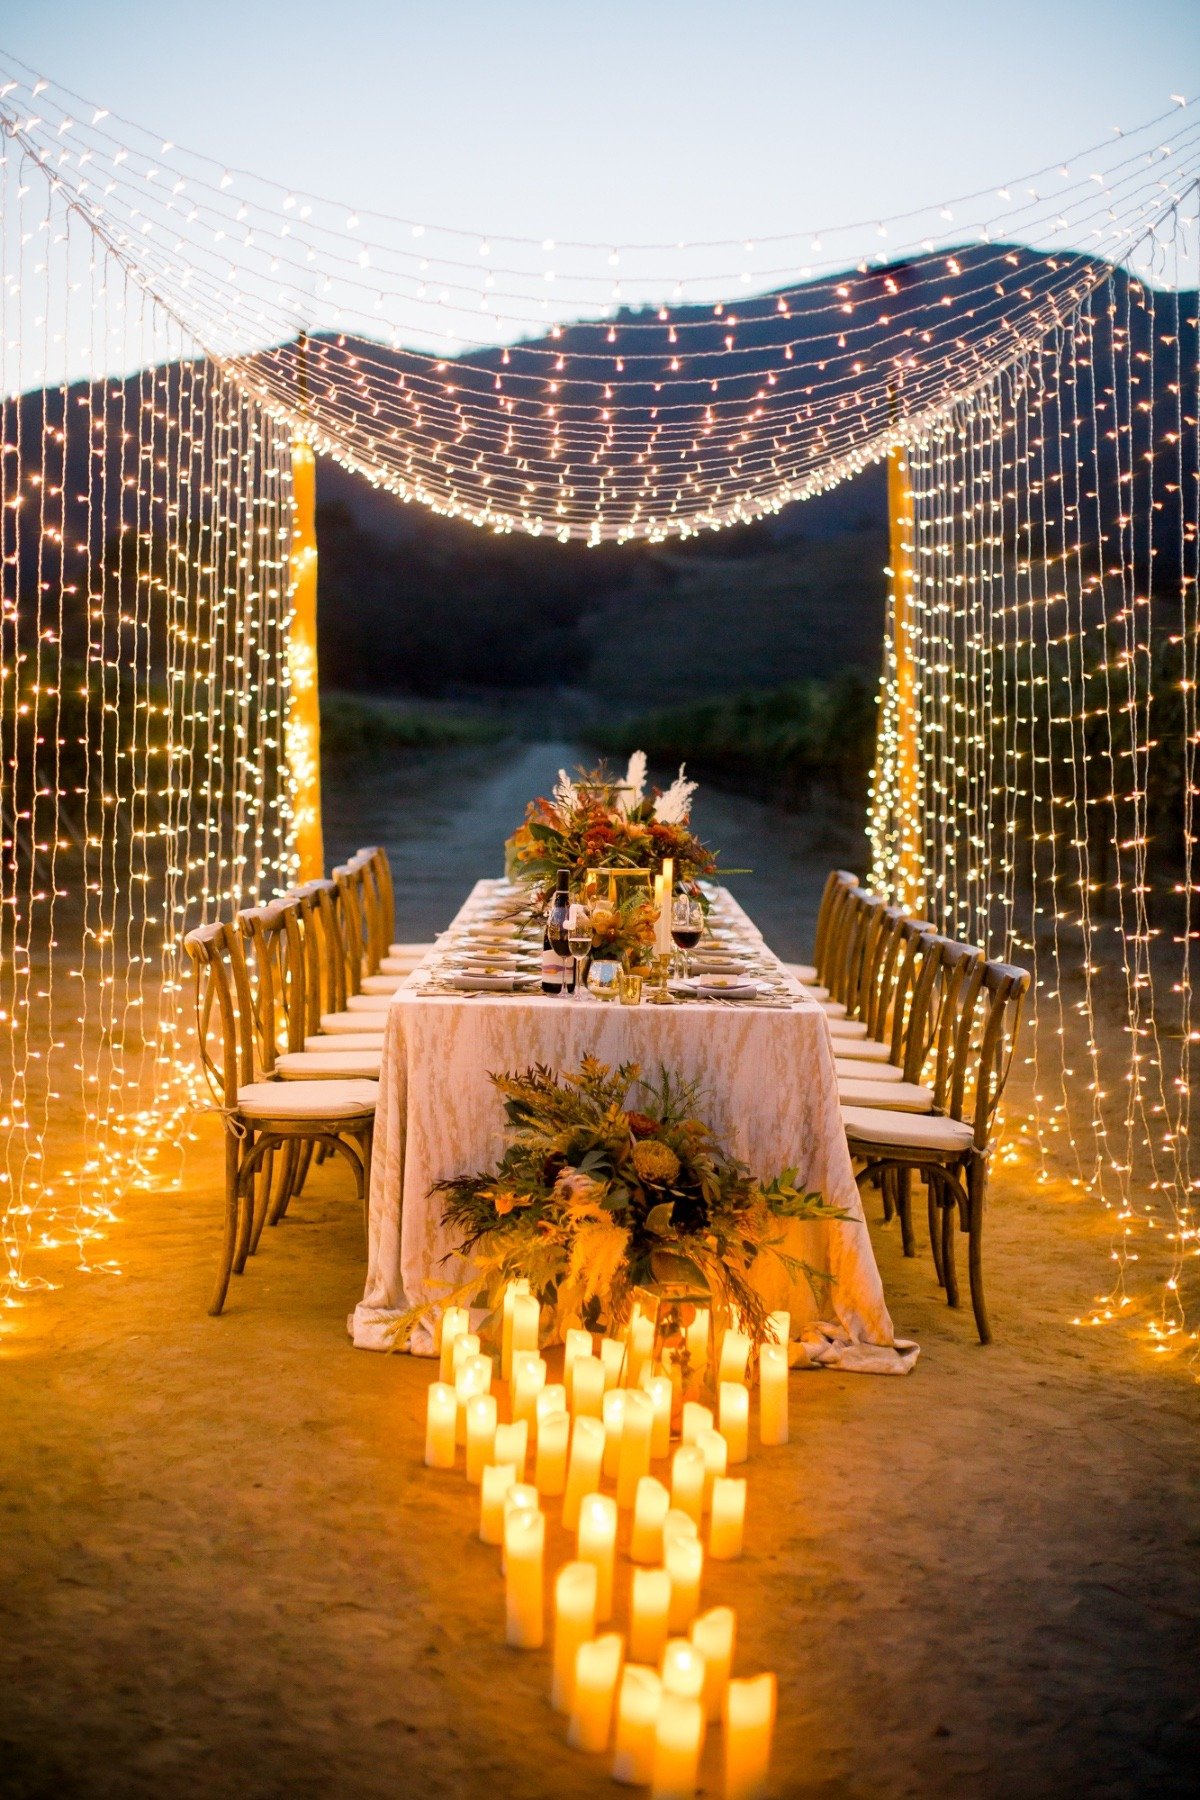 5 Tips on How to Hang Fairy Lights